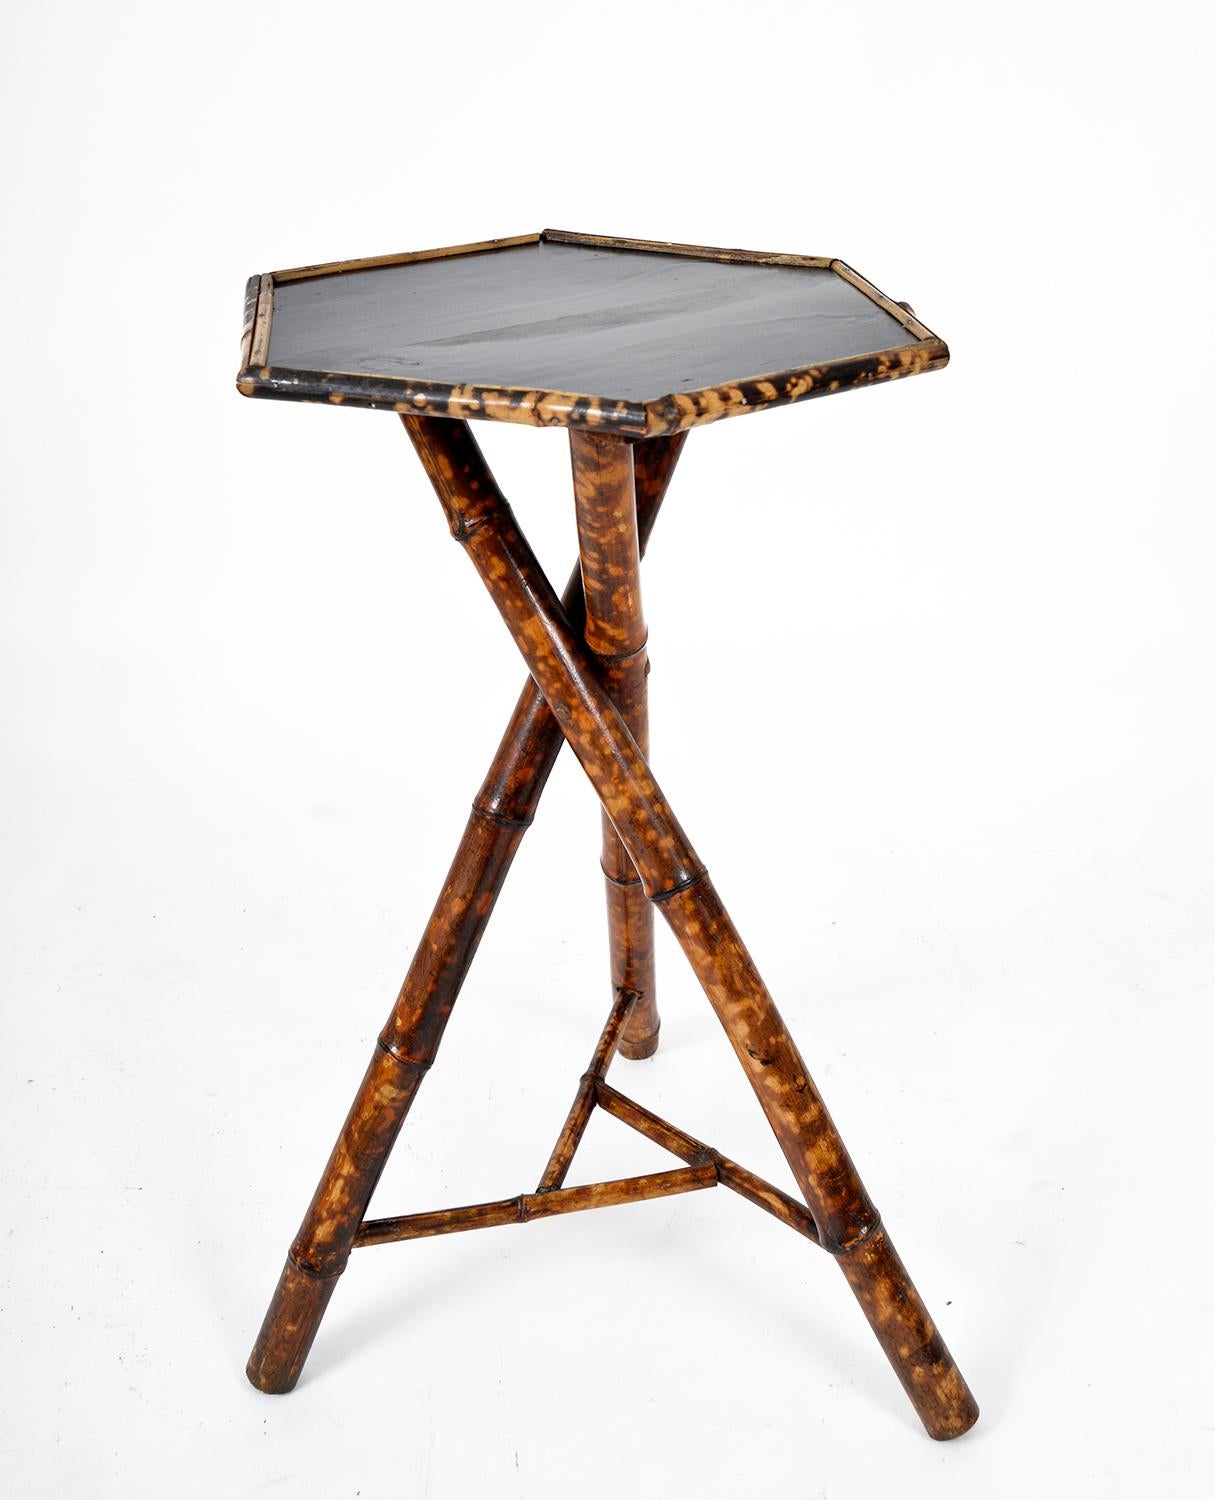 This stunning late 19th Century English three-legged tortoiseshell bamboo side table with stretcher has a hexagonal ebonized top tray edged in bamboo. A versatile piece of antique furniture with a highly desirable vibrant colour to the bamboo and